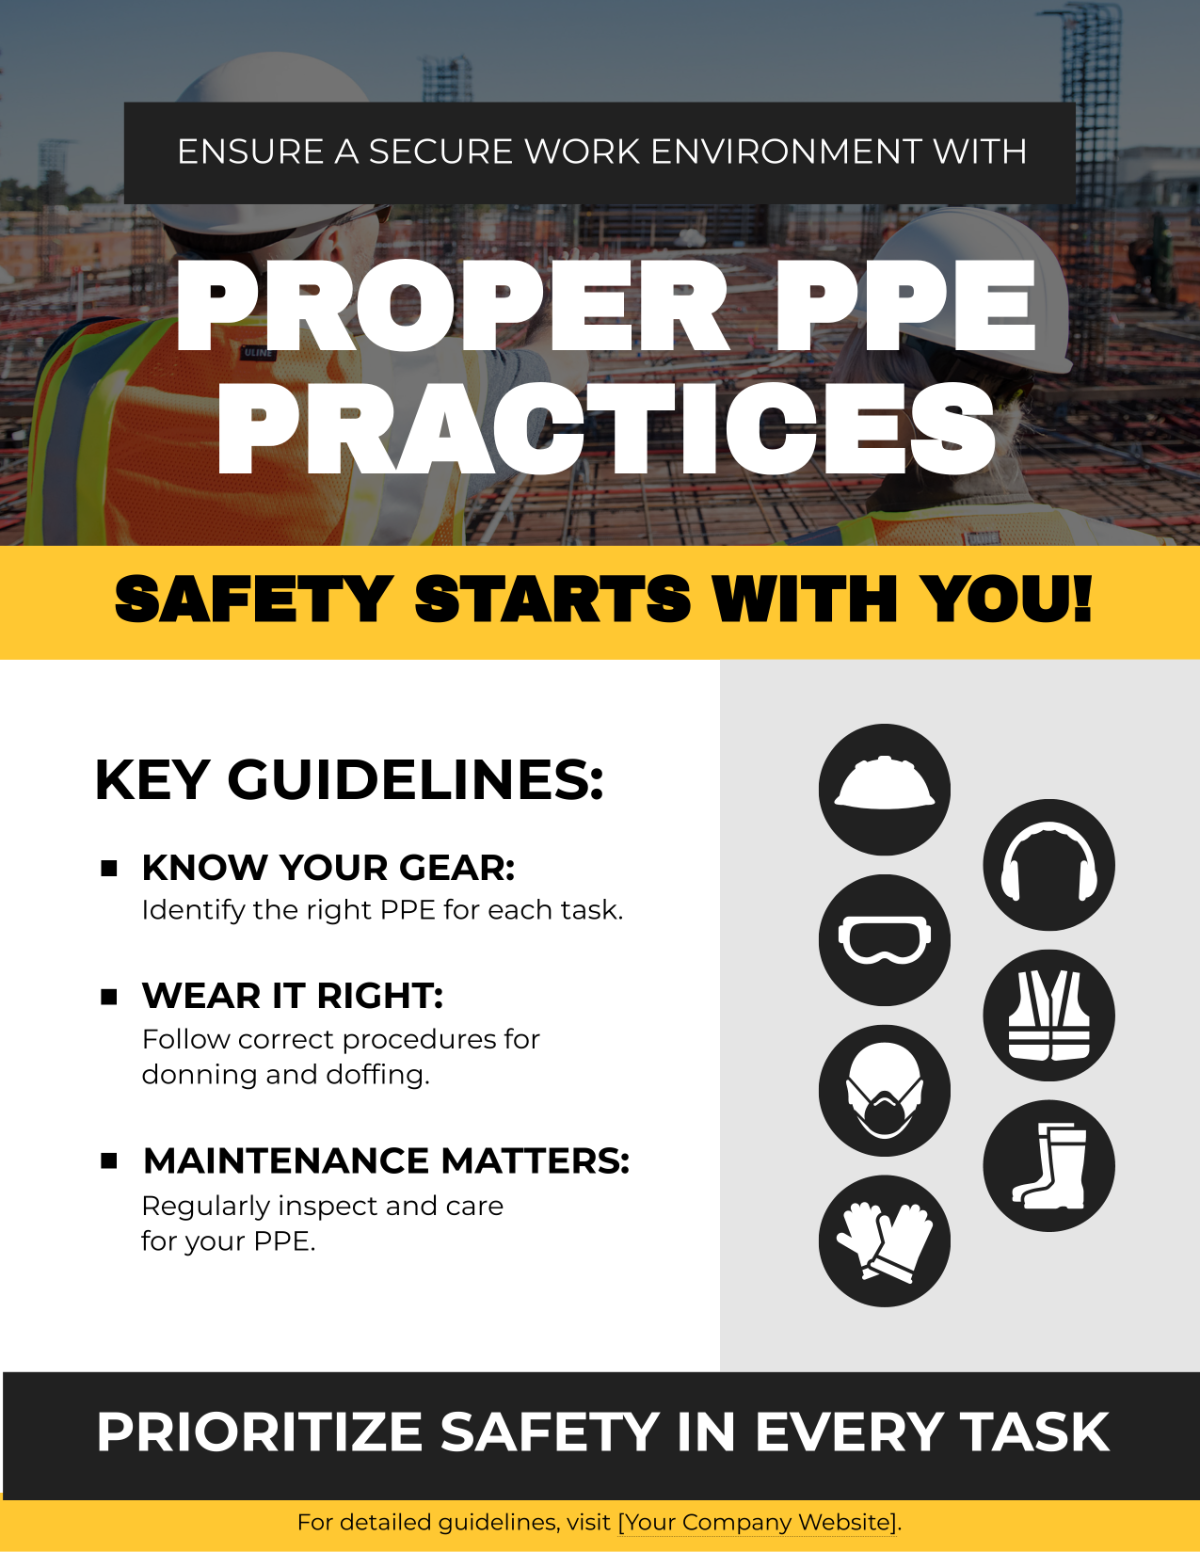 Personal Protective Equipment (PPE) Usage Flyer